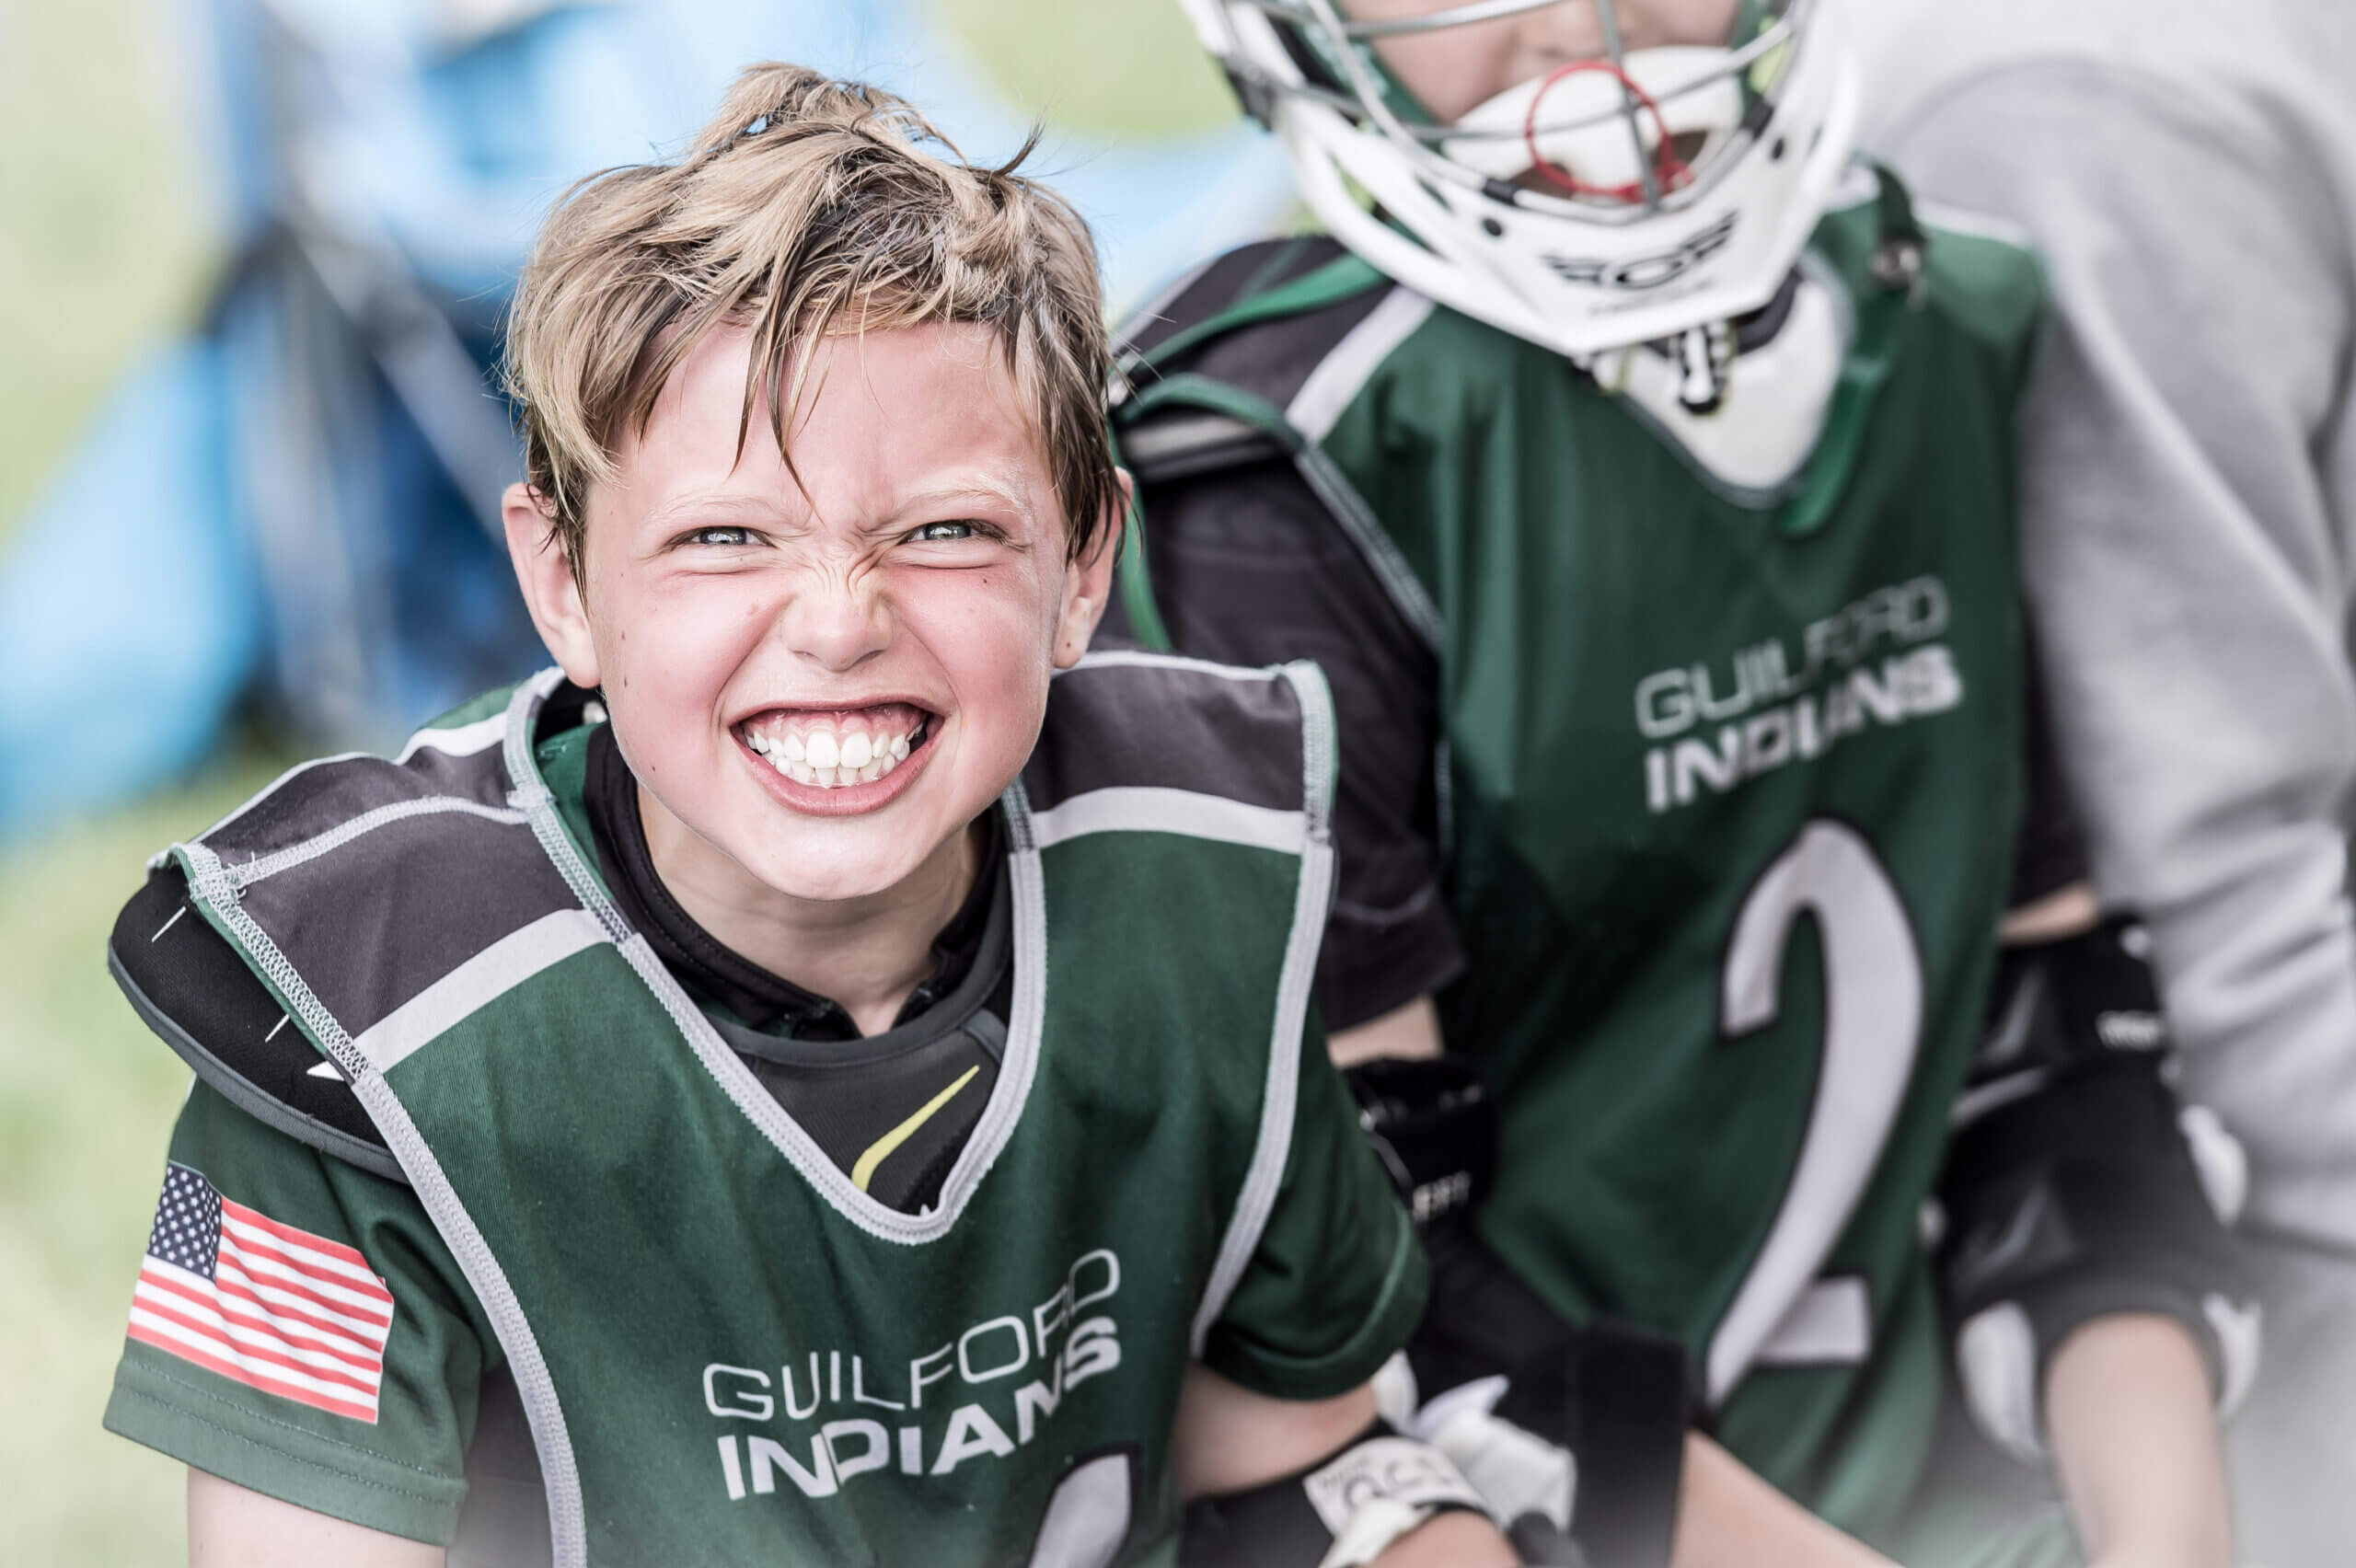 A child in a sports jersey smiles widely and scrunches their nose.